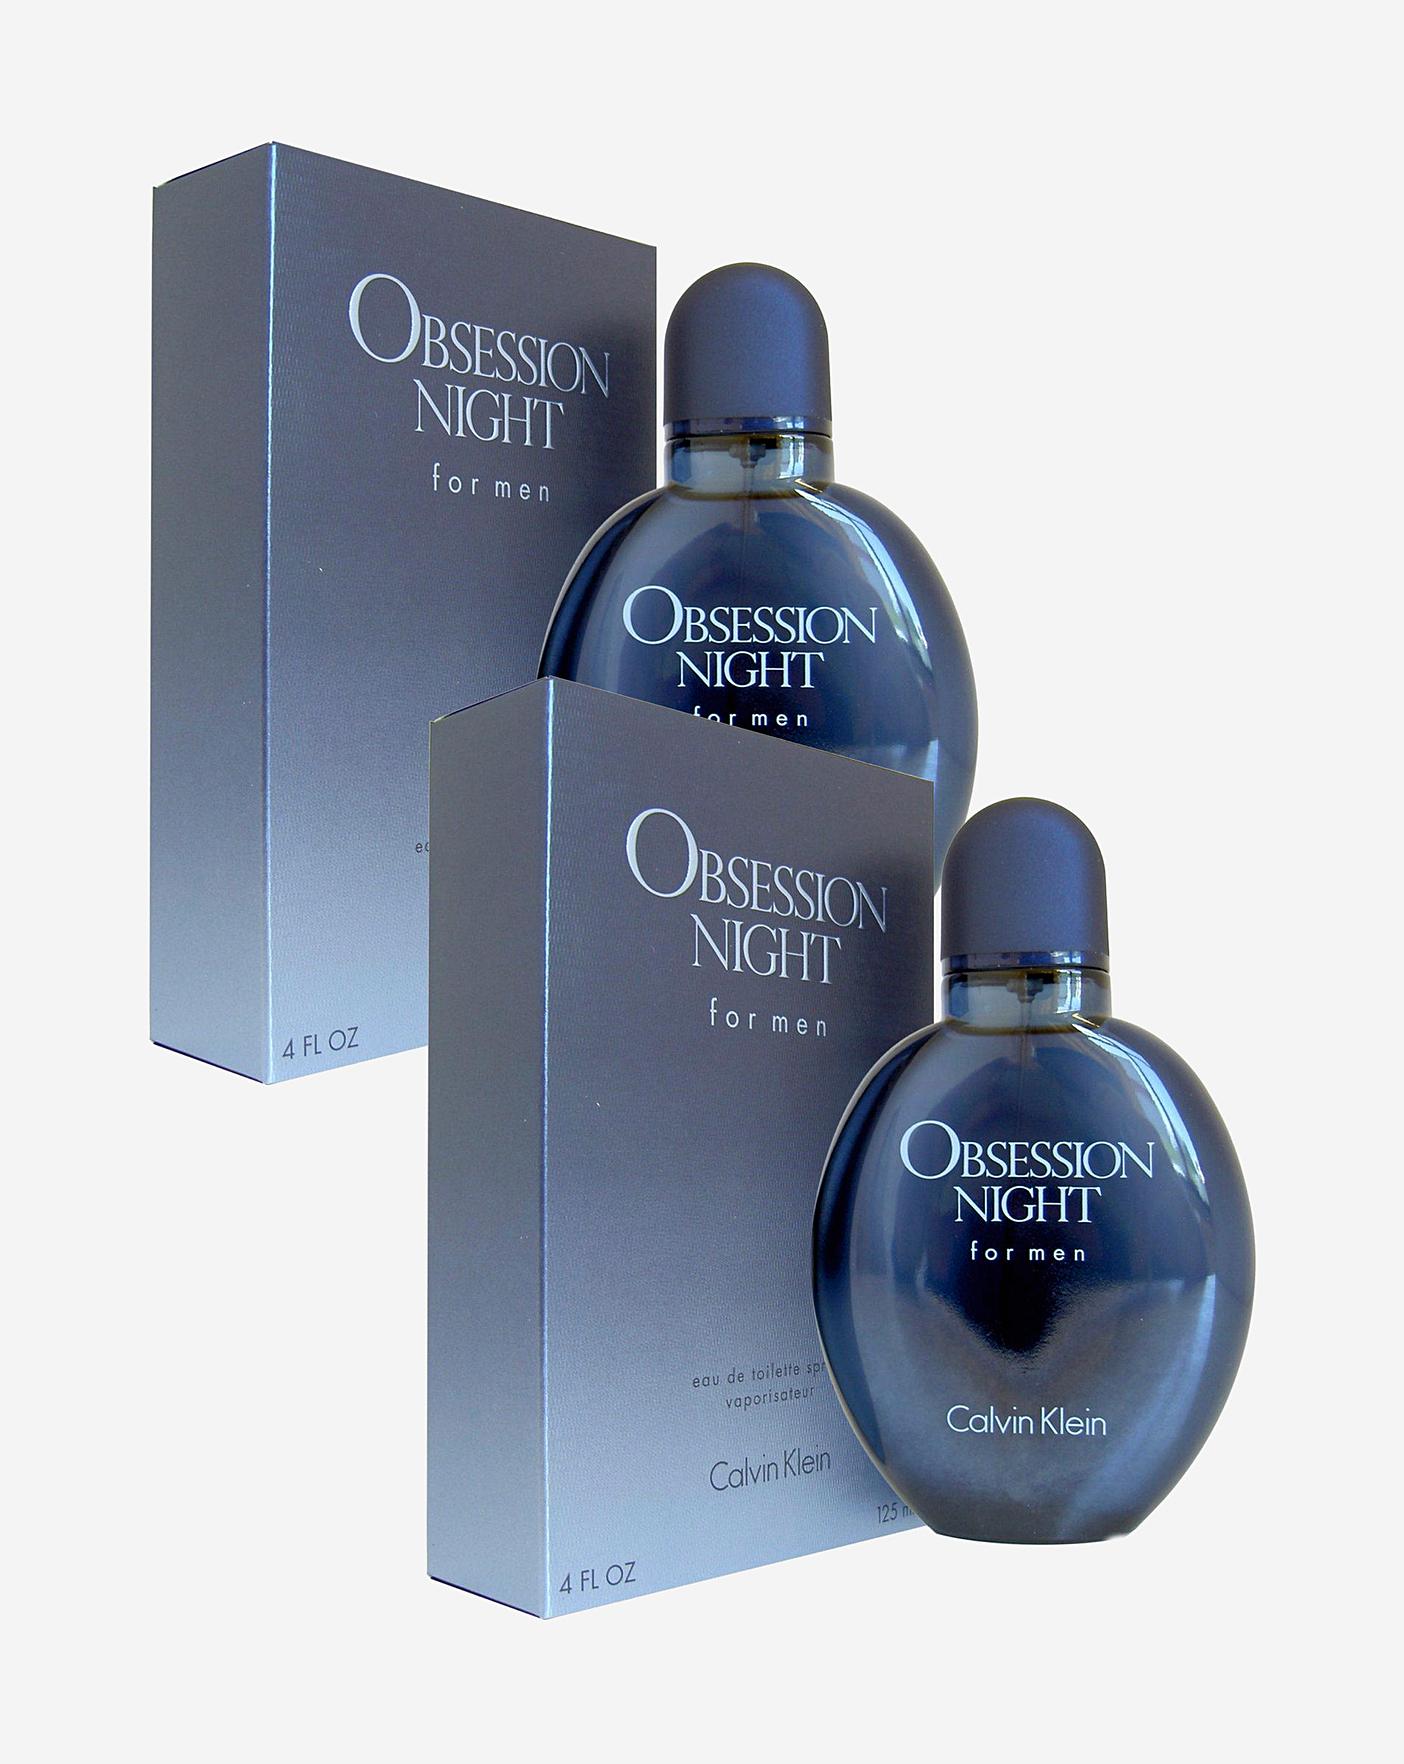 EDT NIGHT OBSESSION 125ML Oxendales X2 CK | HOMME